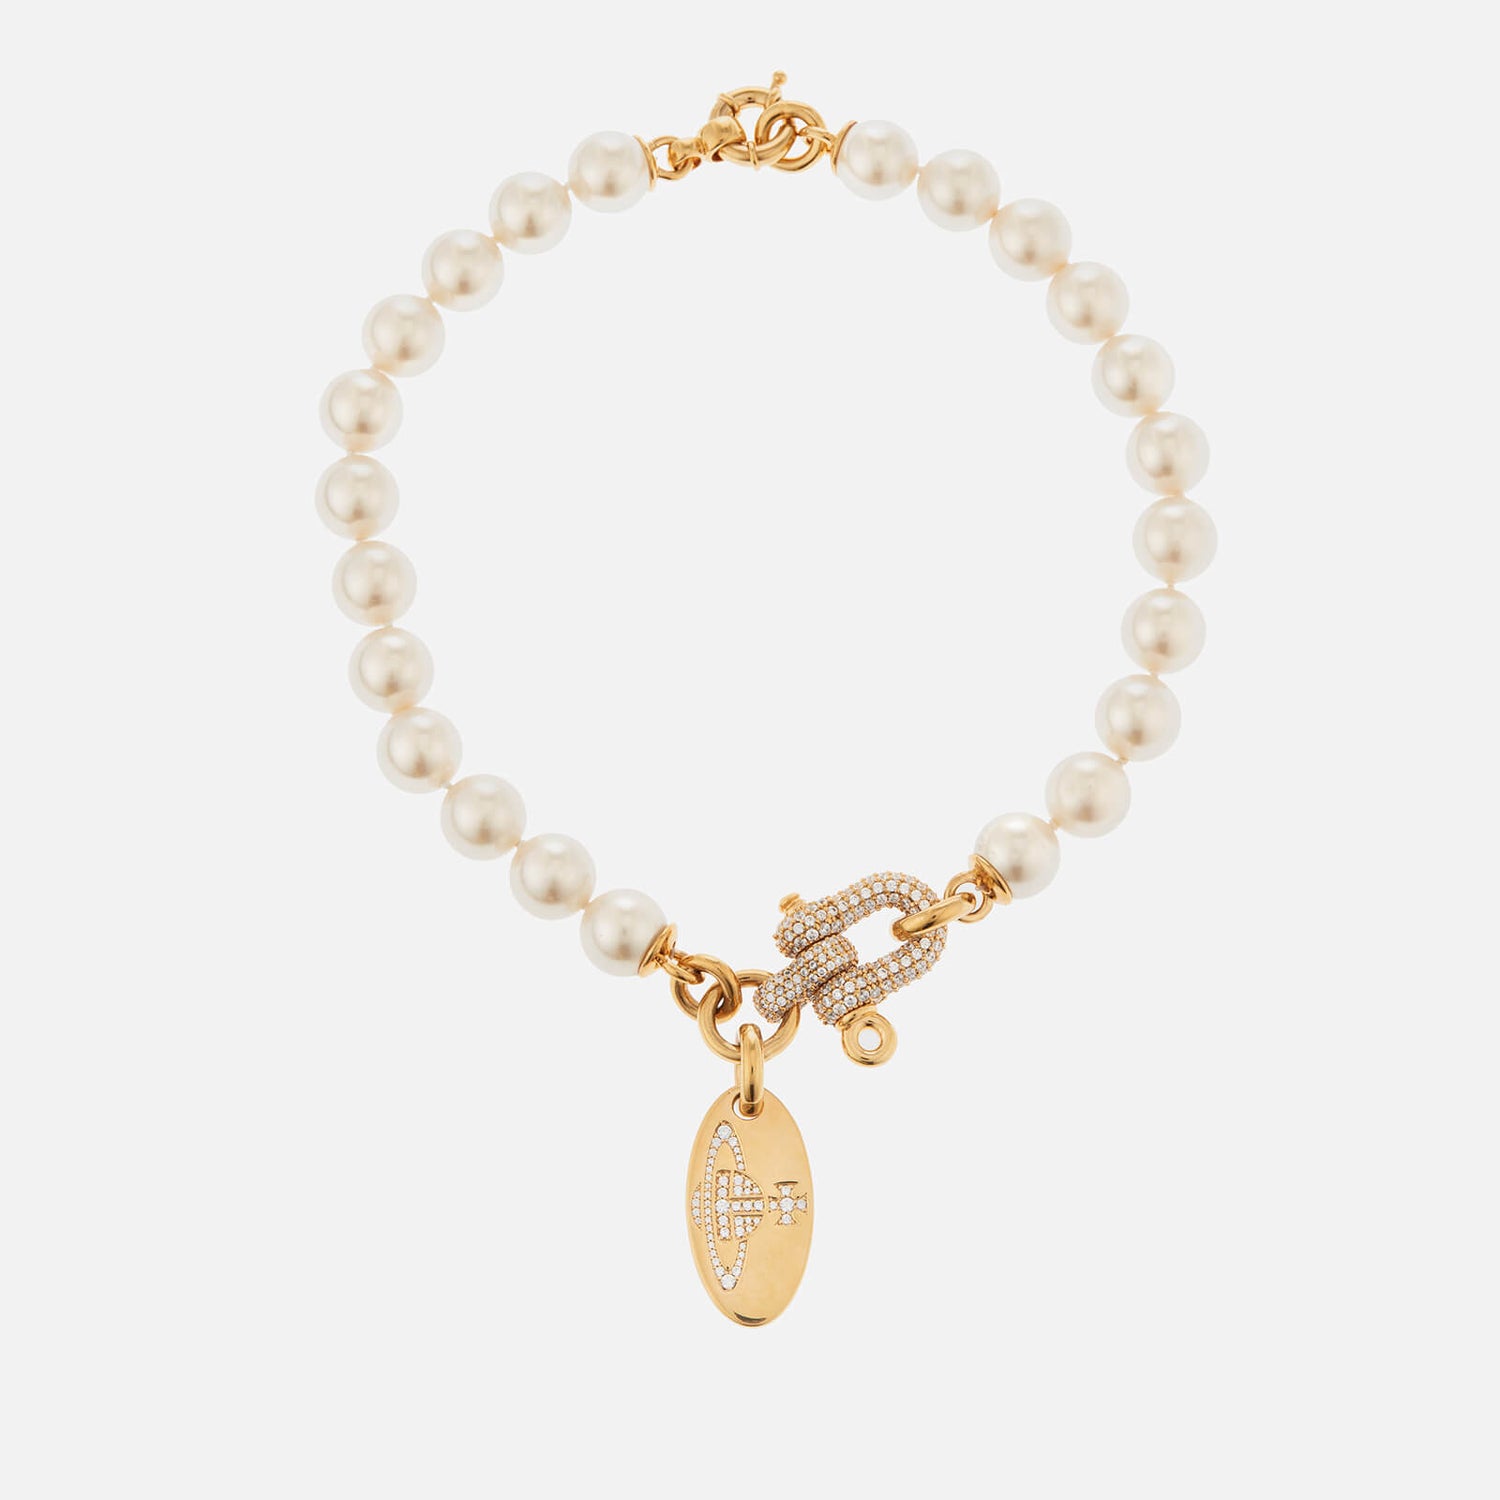 Vivienne Westwood Women's Isoria Pearl Necklace - Gold/White